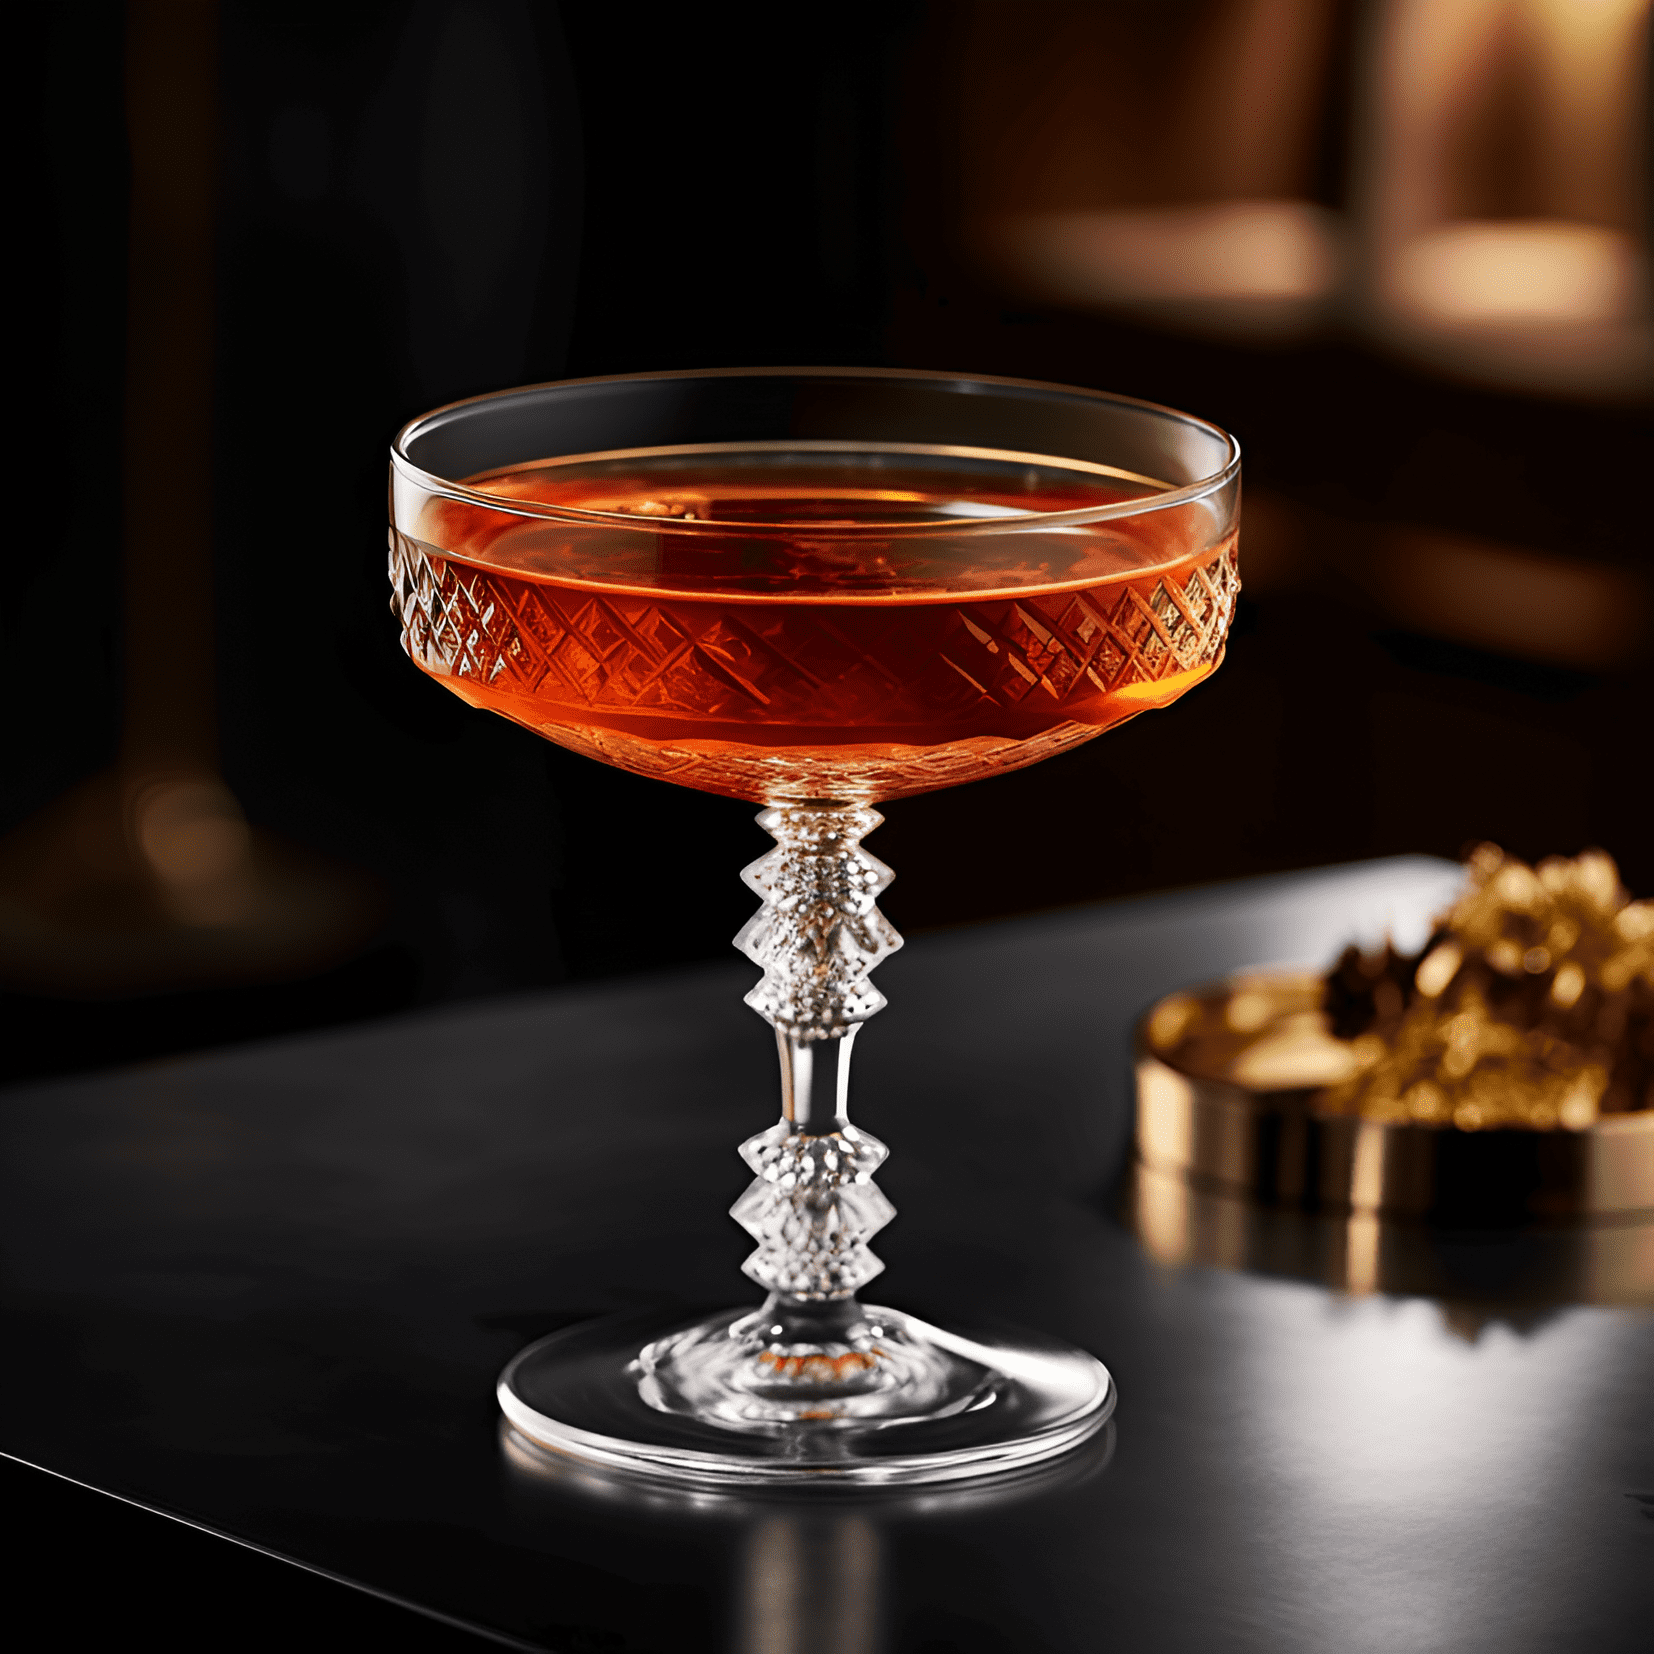 Roulette Royale Cocktail Recipe - The Roulette Royale is a complex and well-balanced cocktail, with a rich and velvety texture. The taste is a delightful combination of sweet, sour, and bitter notes, with a hint of spice and a smooth, warming finish.